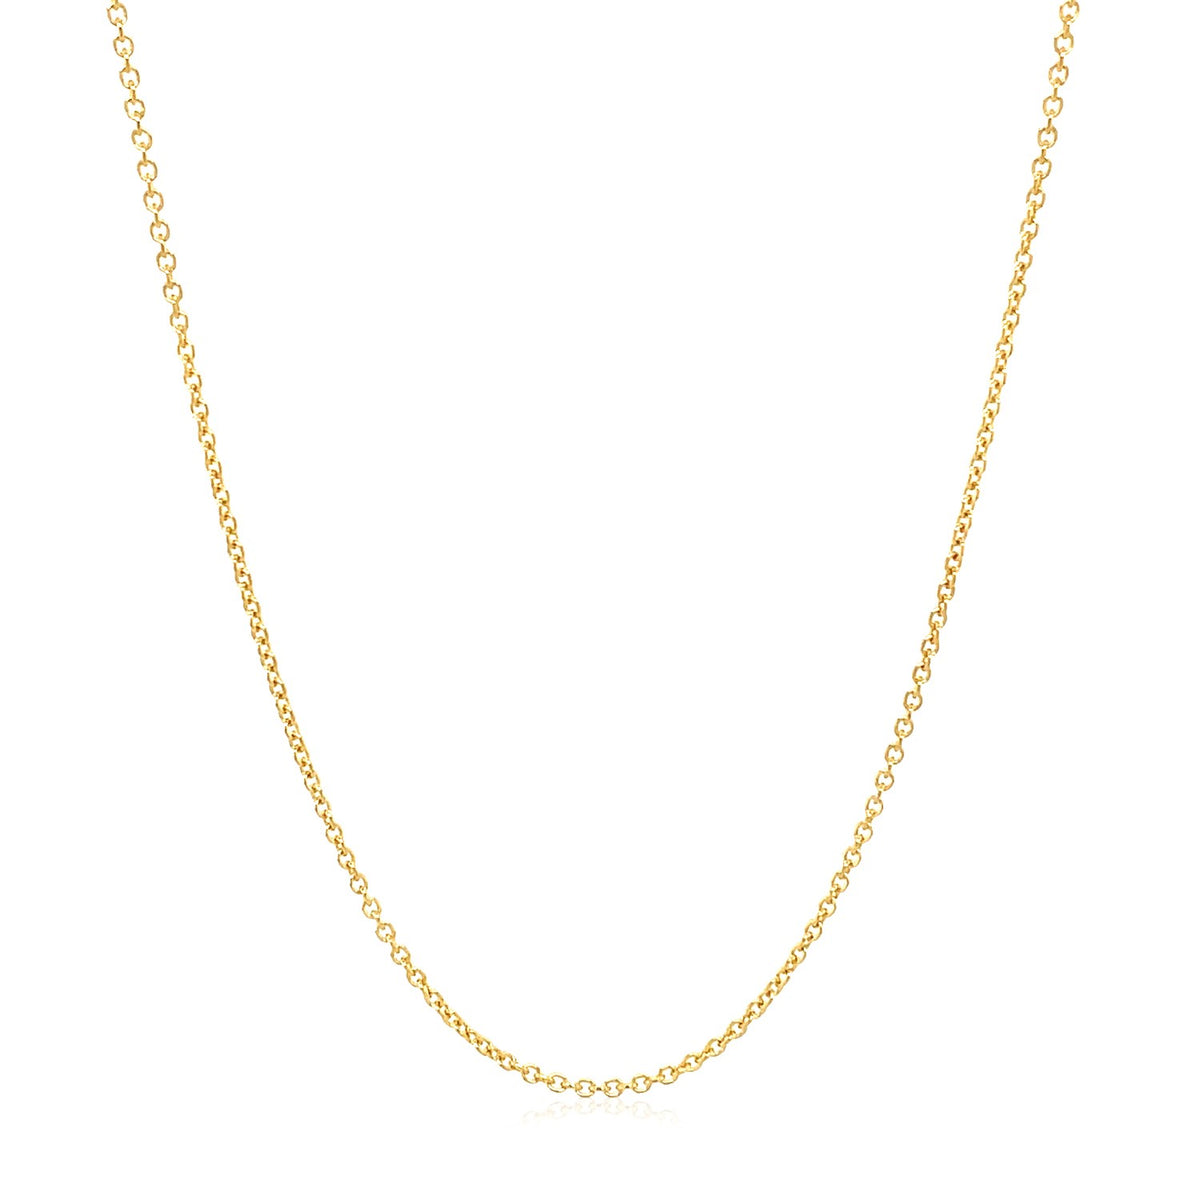 Round Cable Link Chain - 14k Yellow Gold 1.20mm